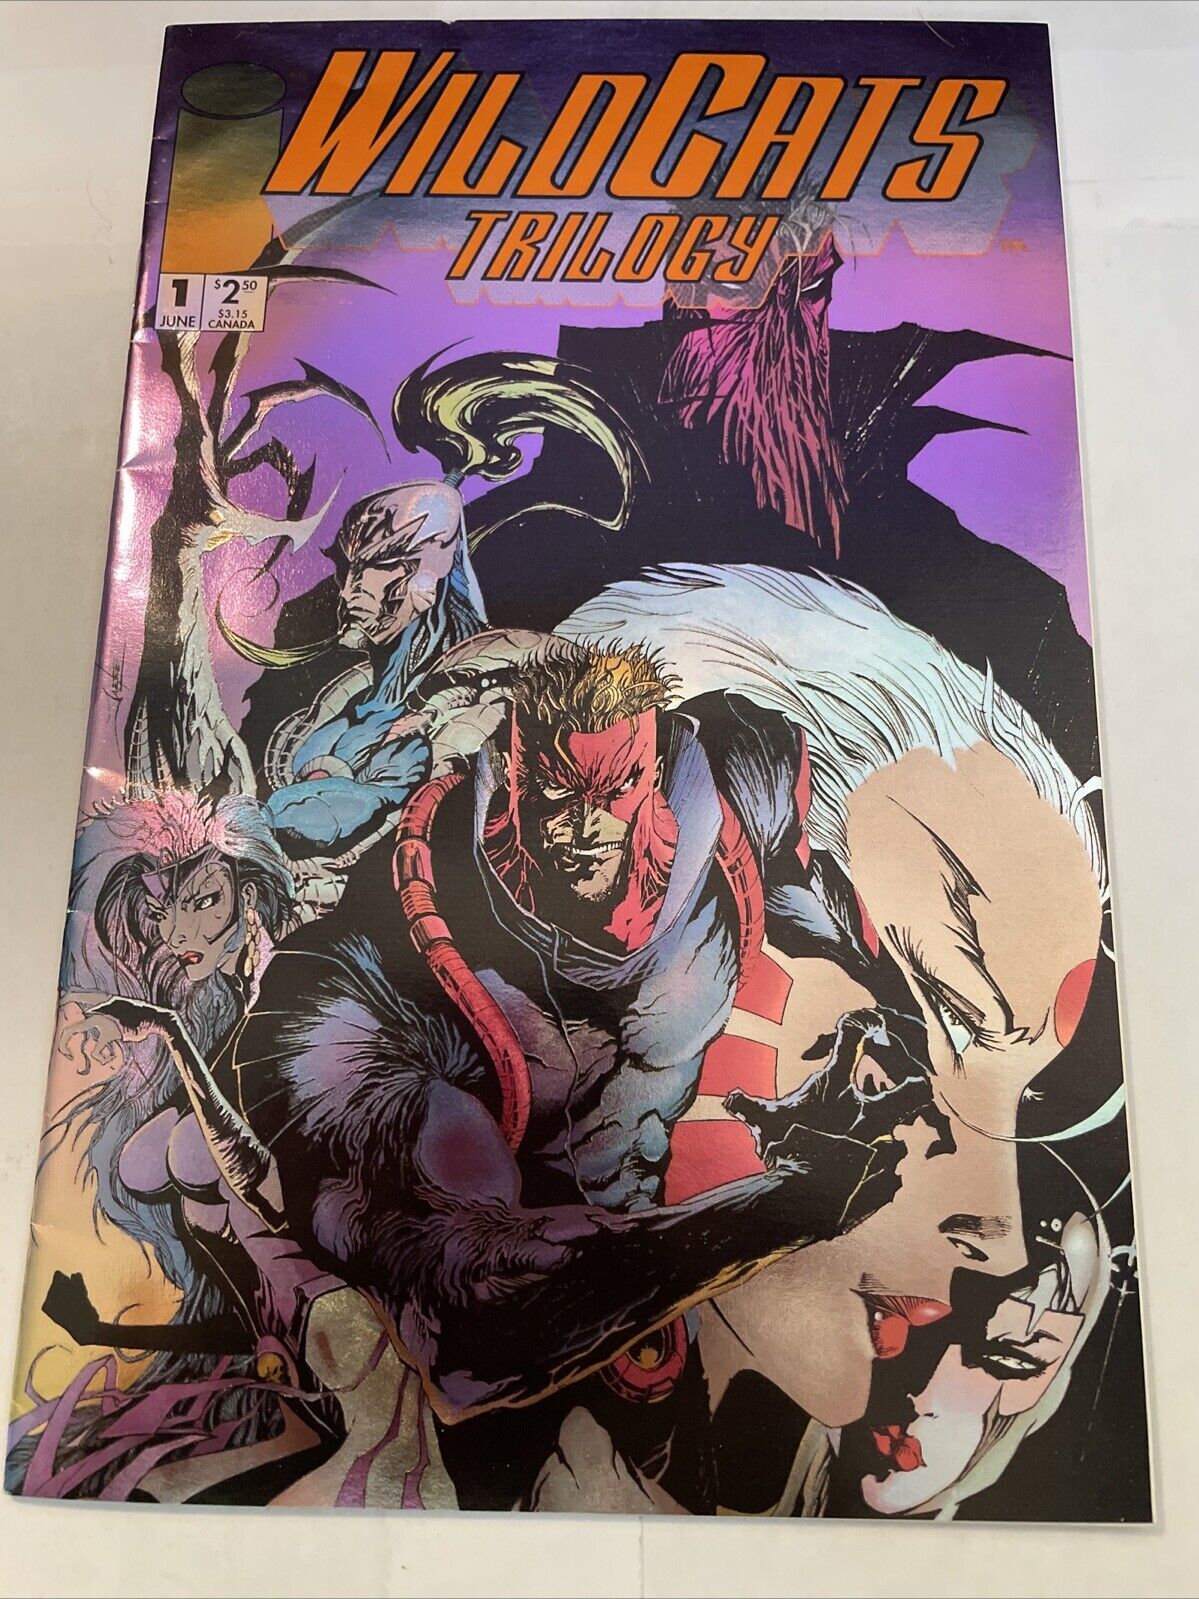 1993 #1 Image WildCats Trilogy Foil Cover VFN Combined Shipping